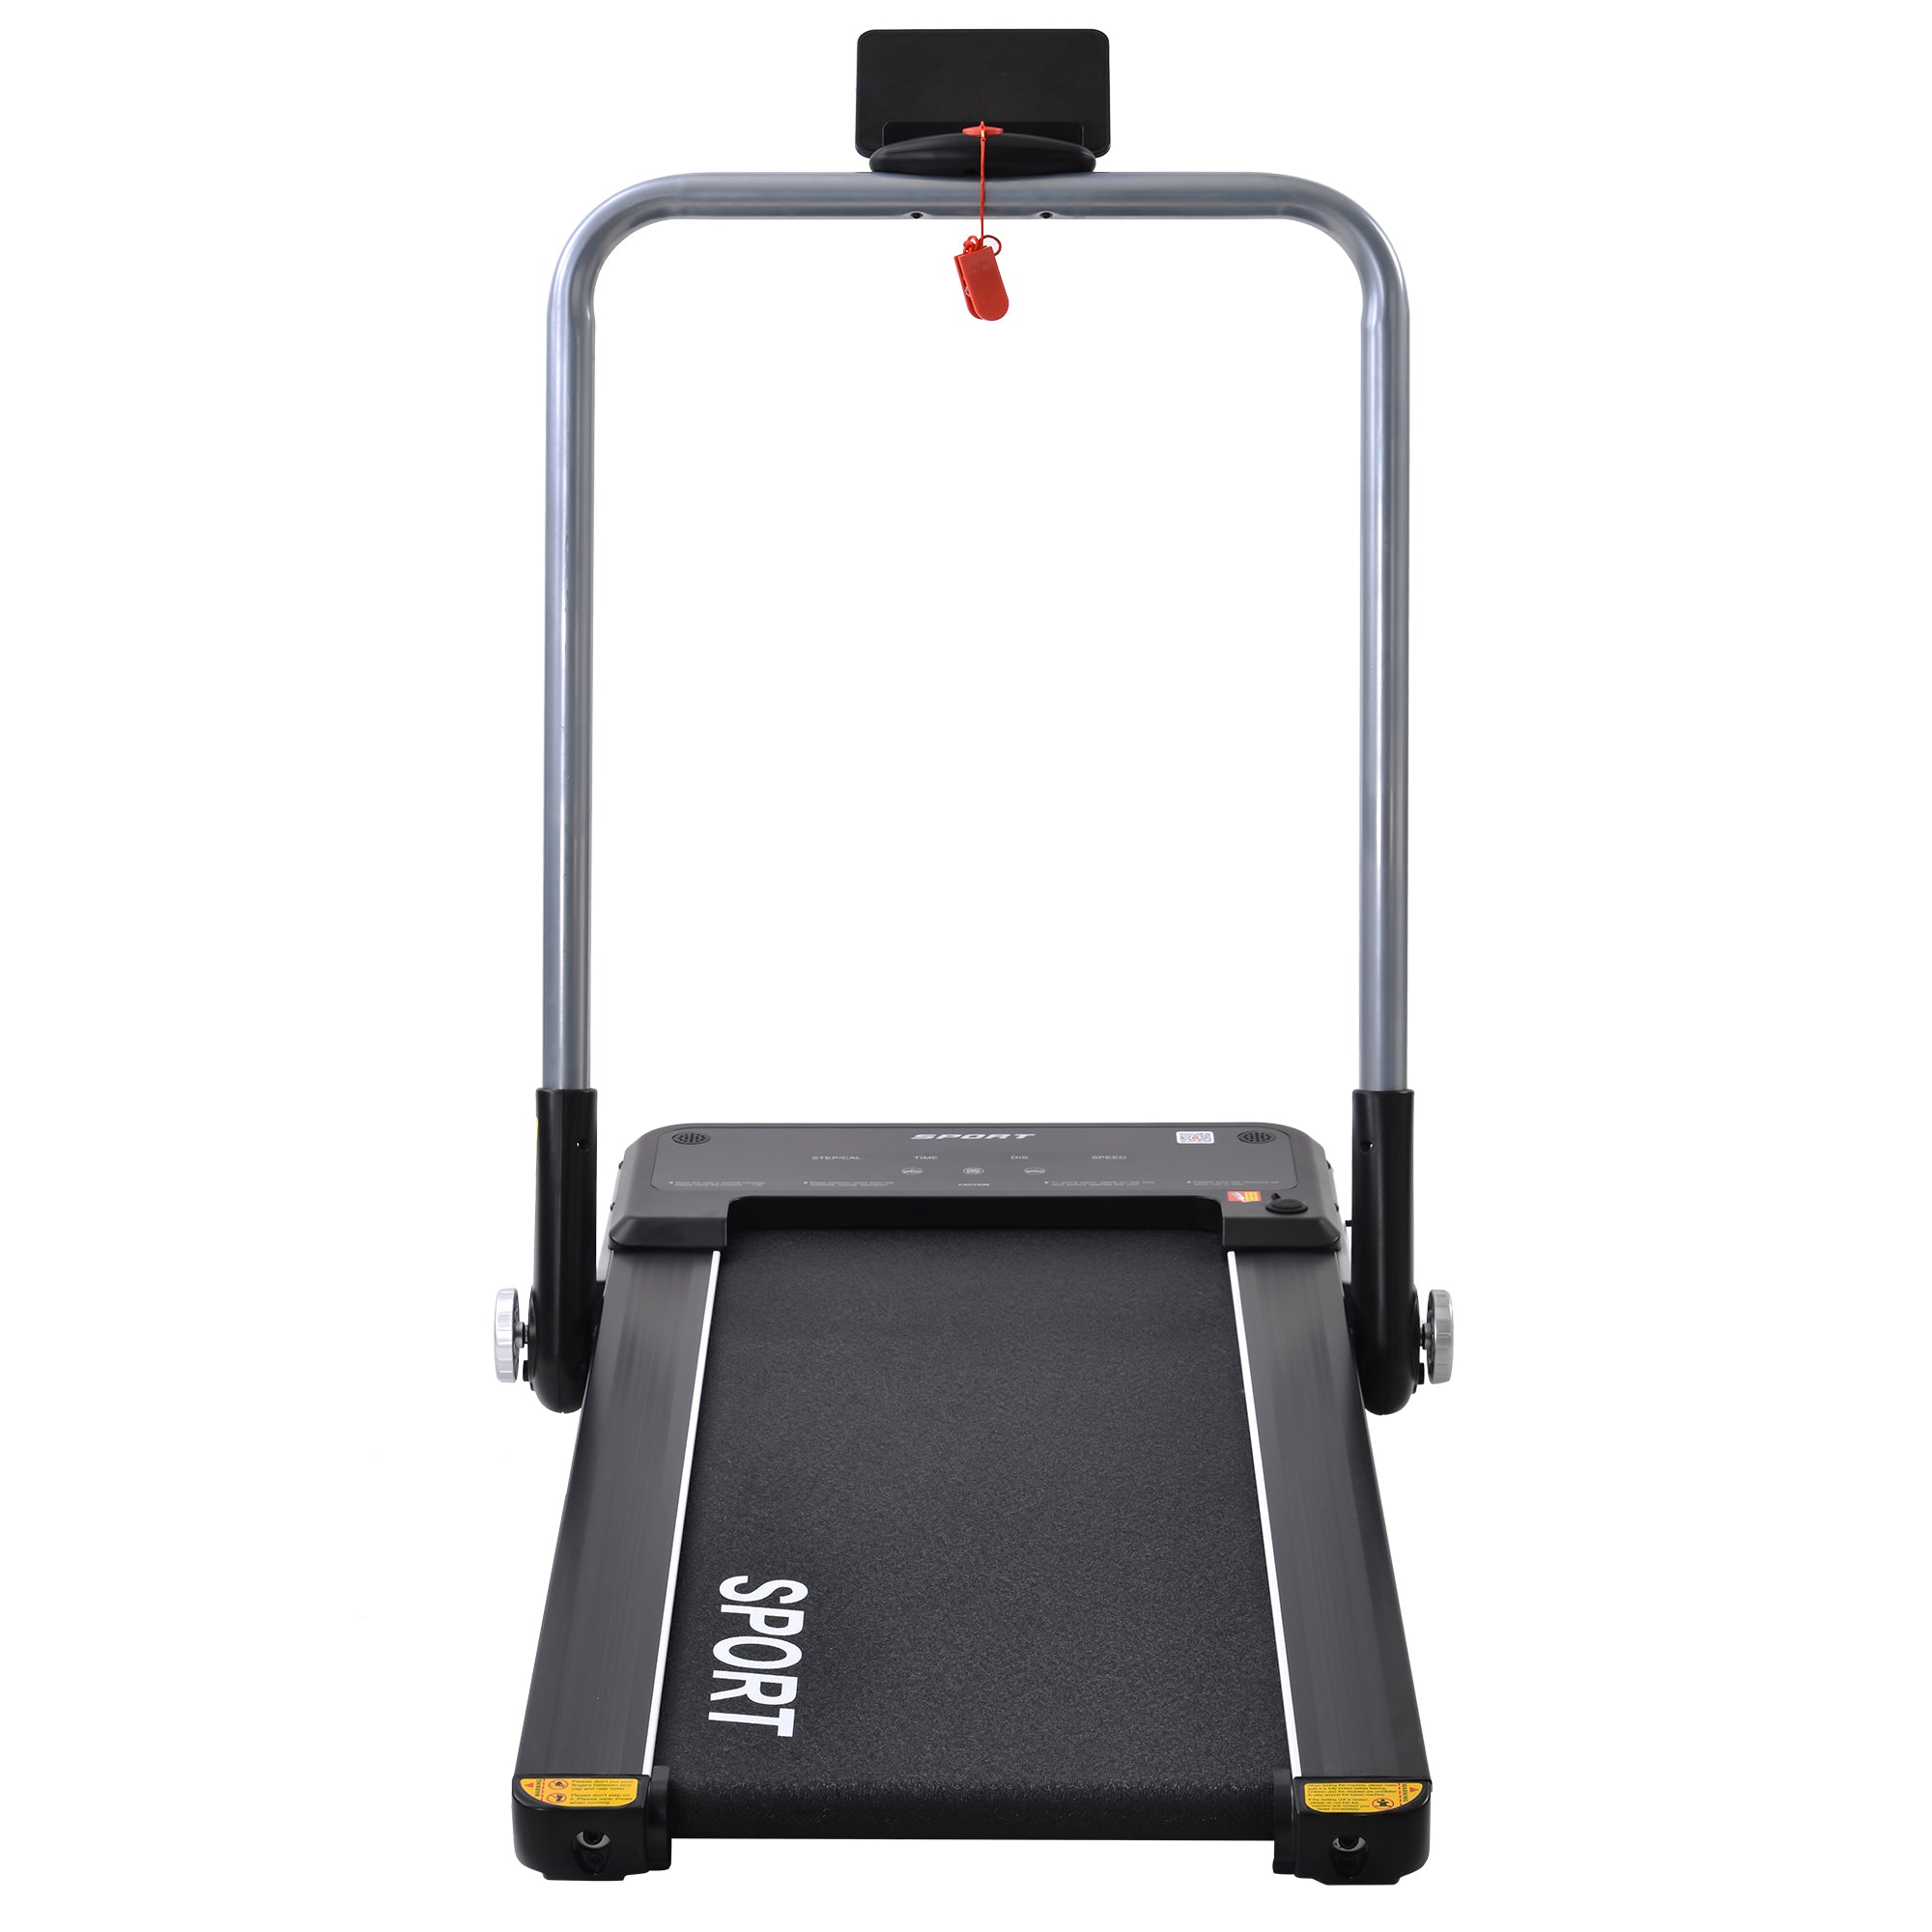 ZNTS 2.5HP Horizontally Foldable Electric Treadmill Motorized Running Machine ,Silver MS199696AAN